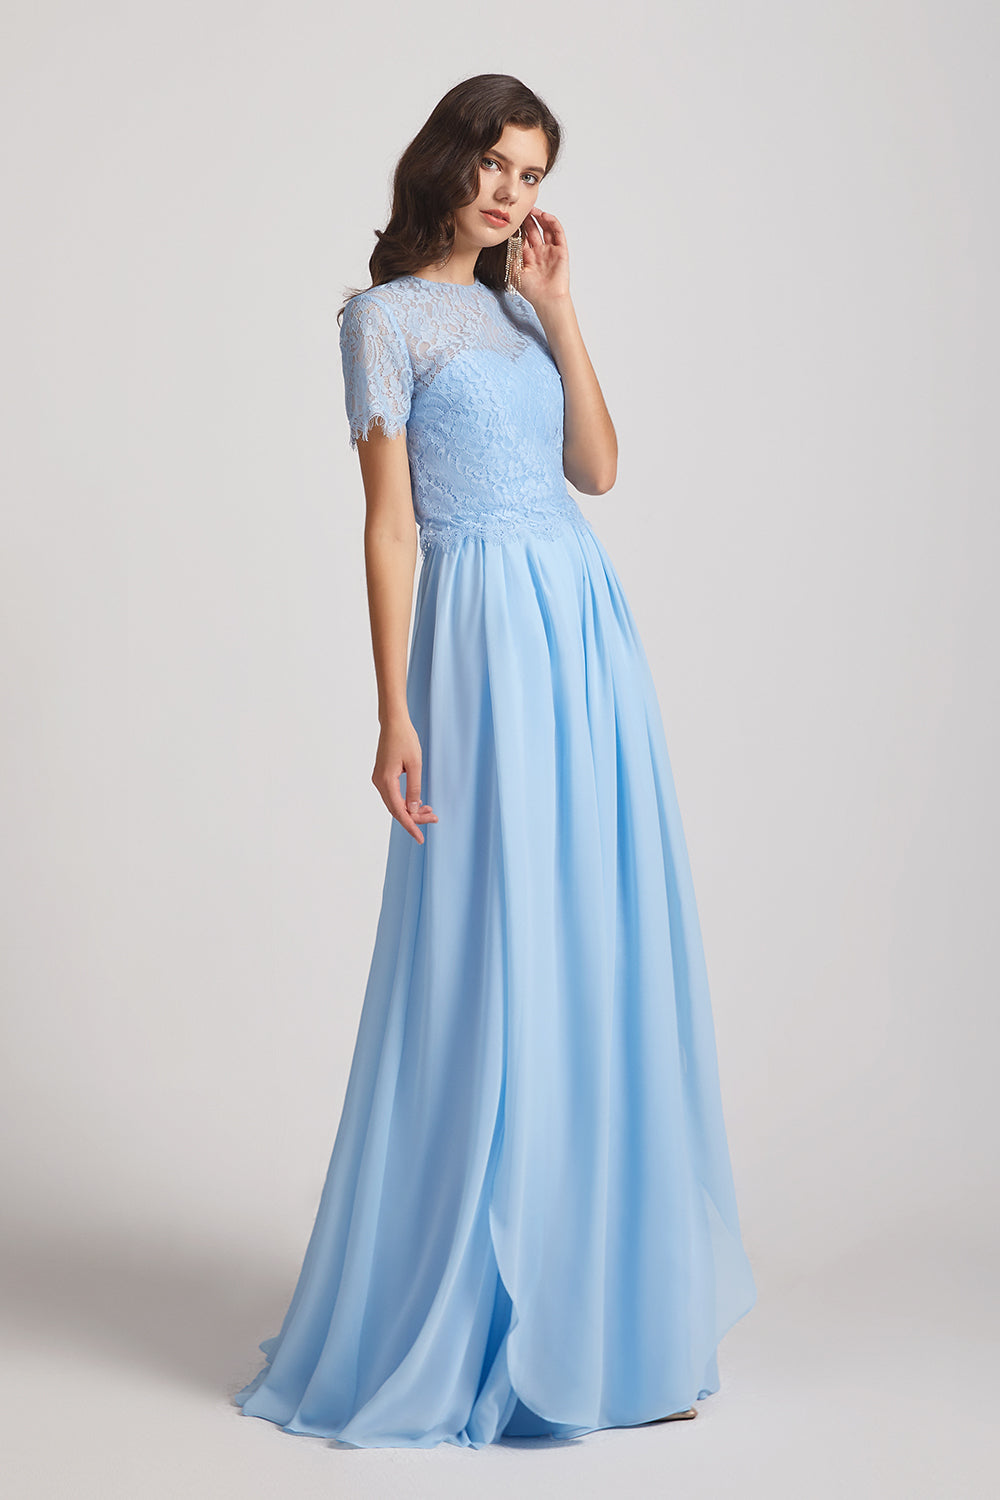 Baby Blue Bridesmaid Gown